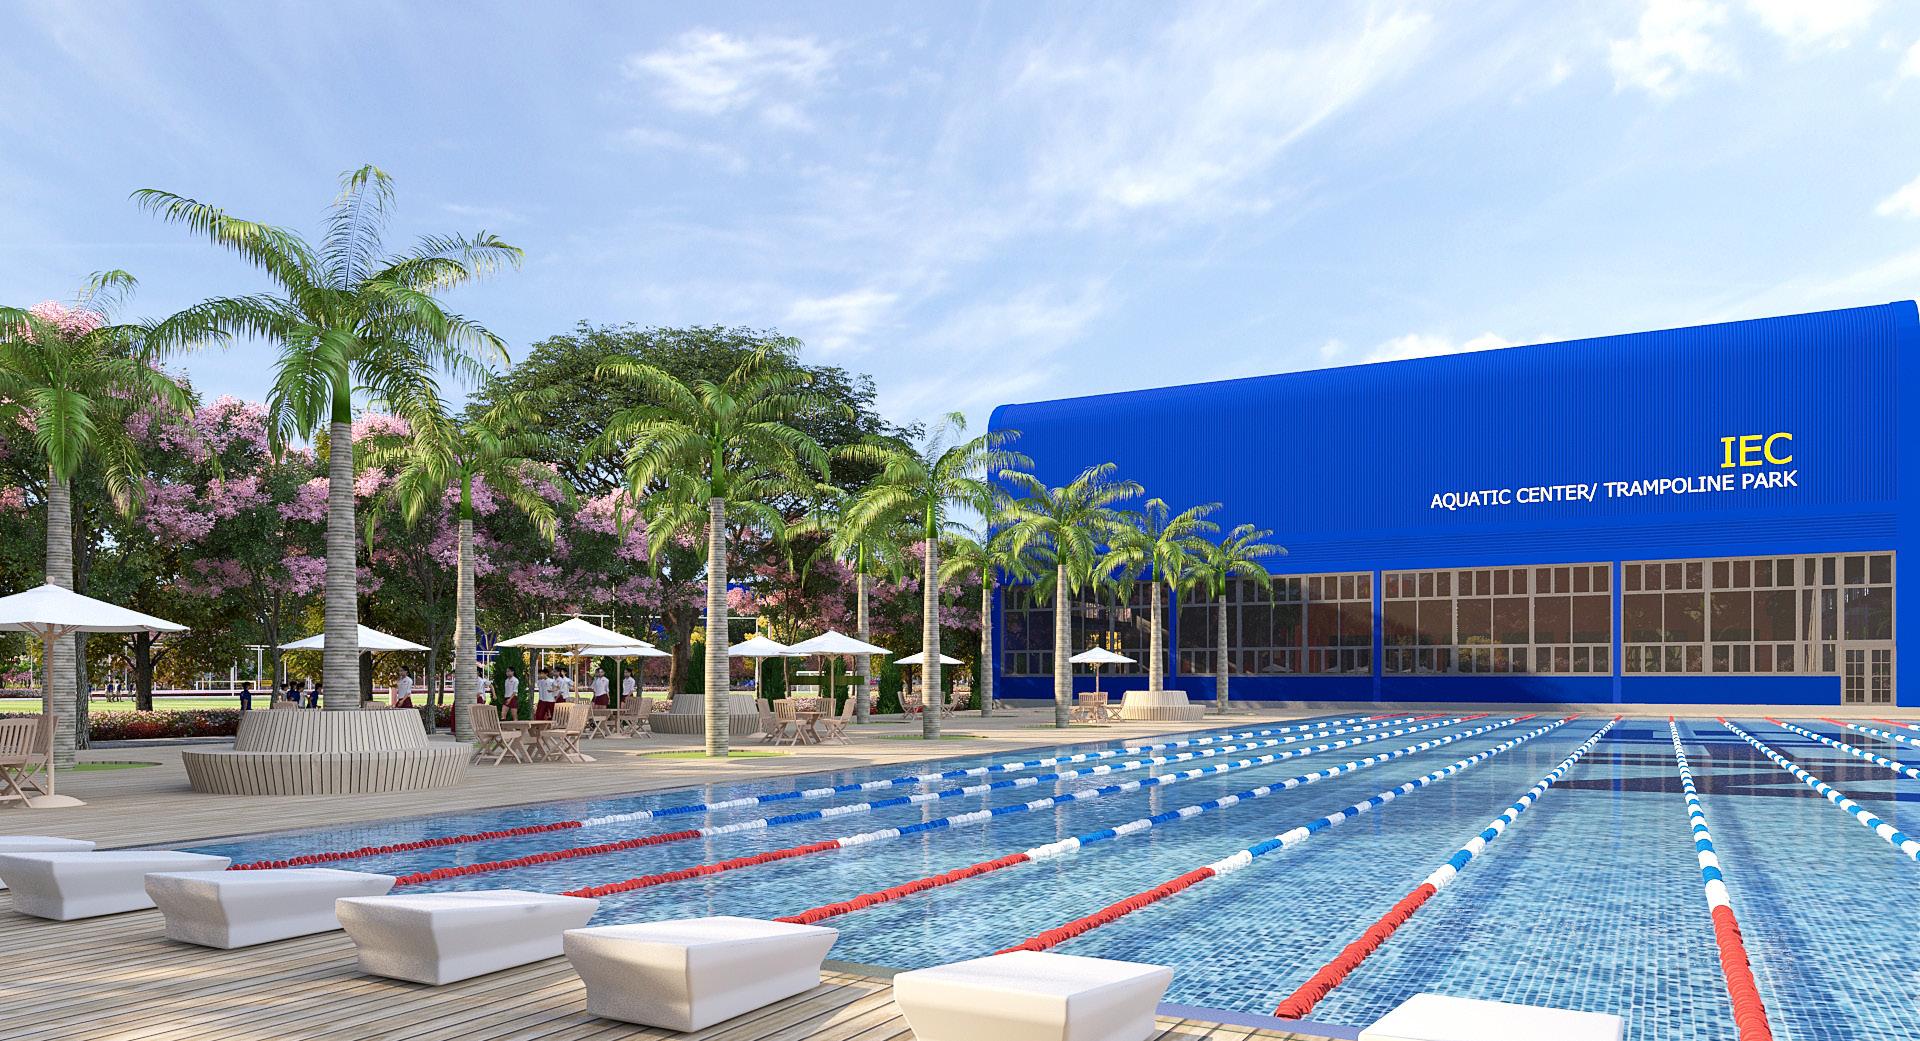 The 10-lane-Olympic-swimming-pool in IEC Quang Ngai